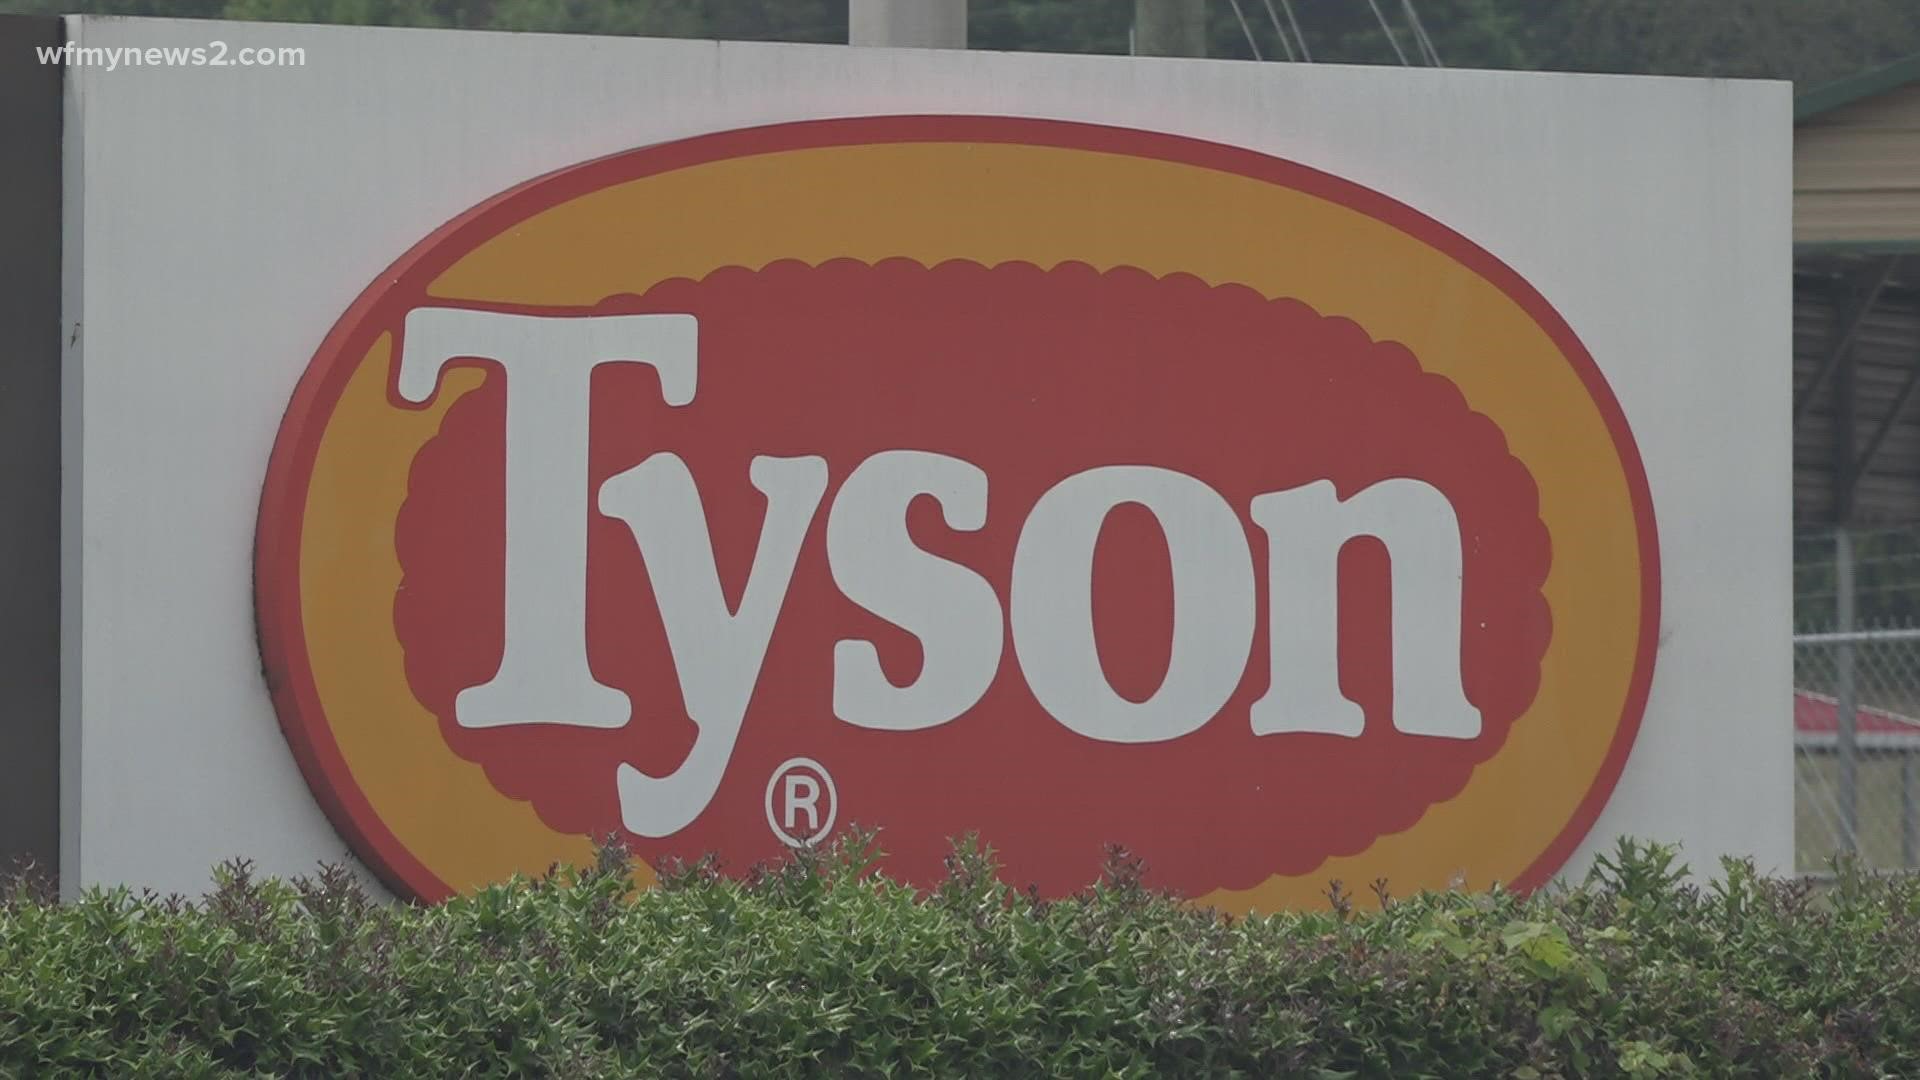 Monday is the deadline for Tyson Foods workers to be vaccinated against COVID-19 or face termination.